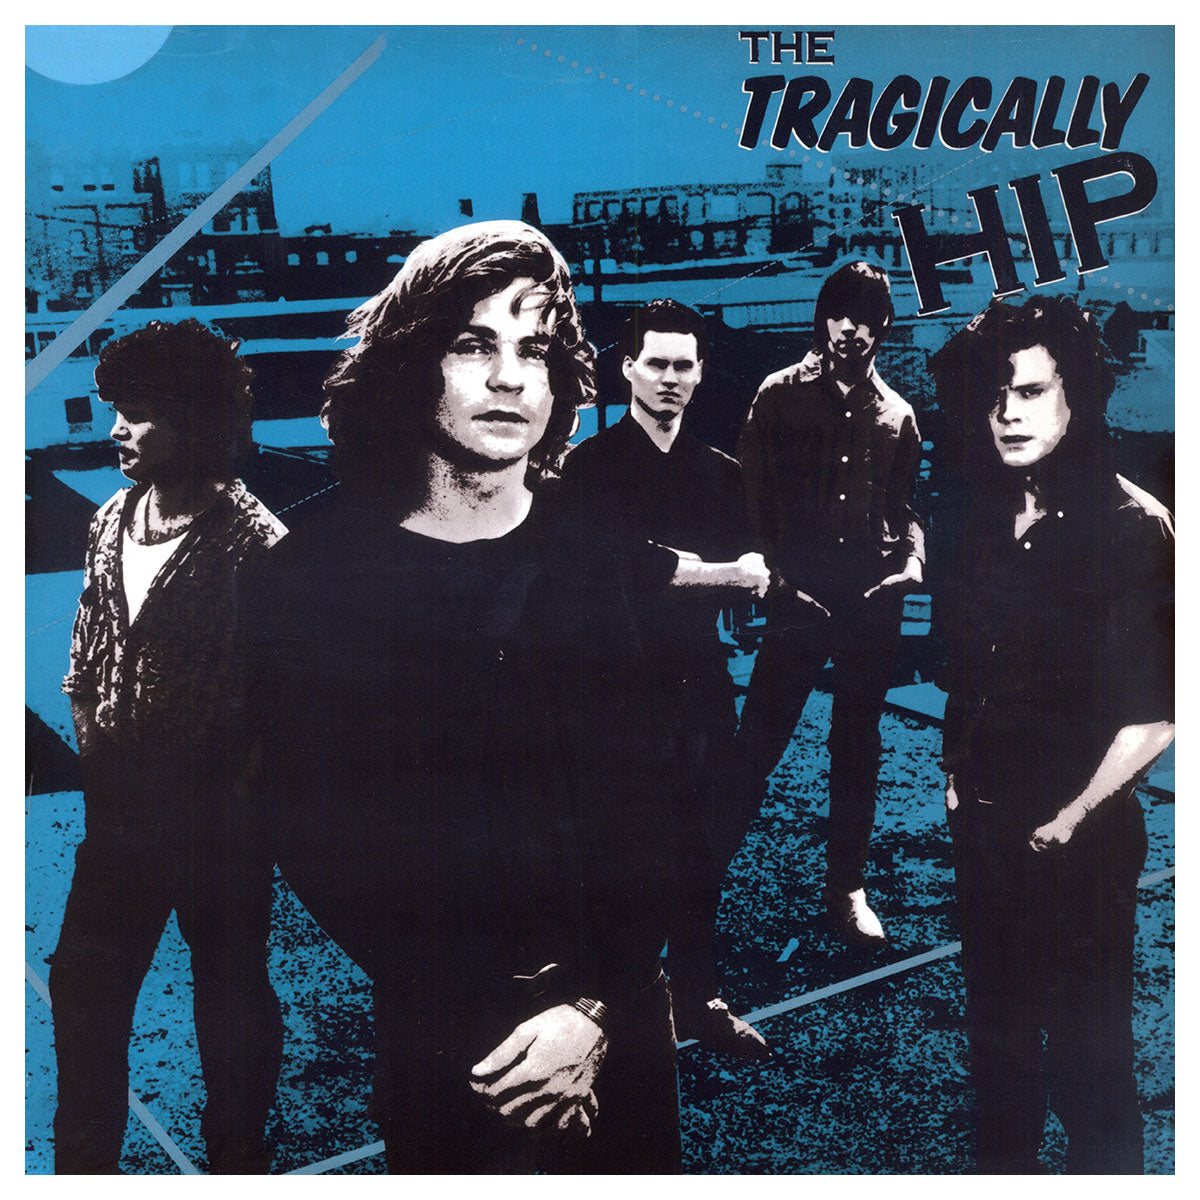 THE TRAGICALLY HIP Self Titled LP